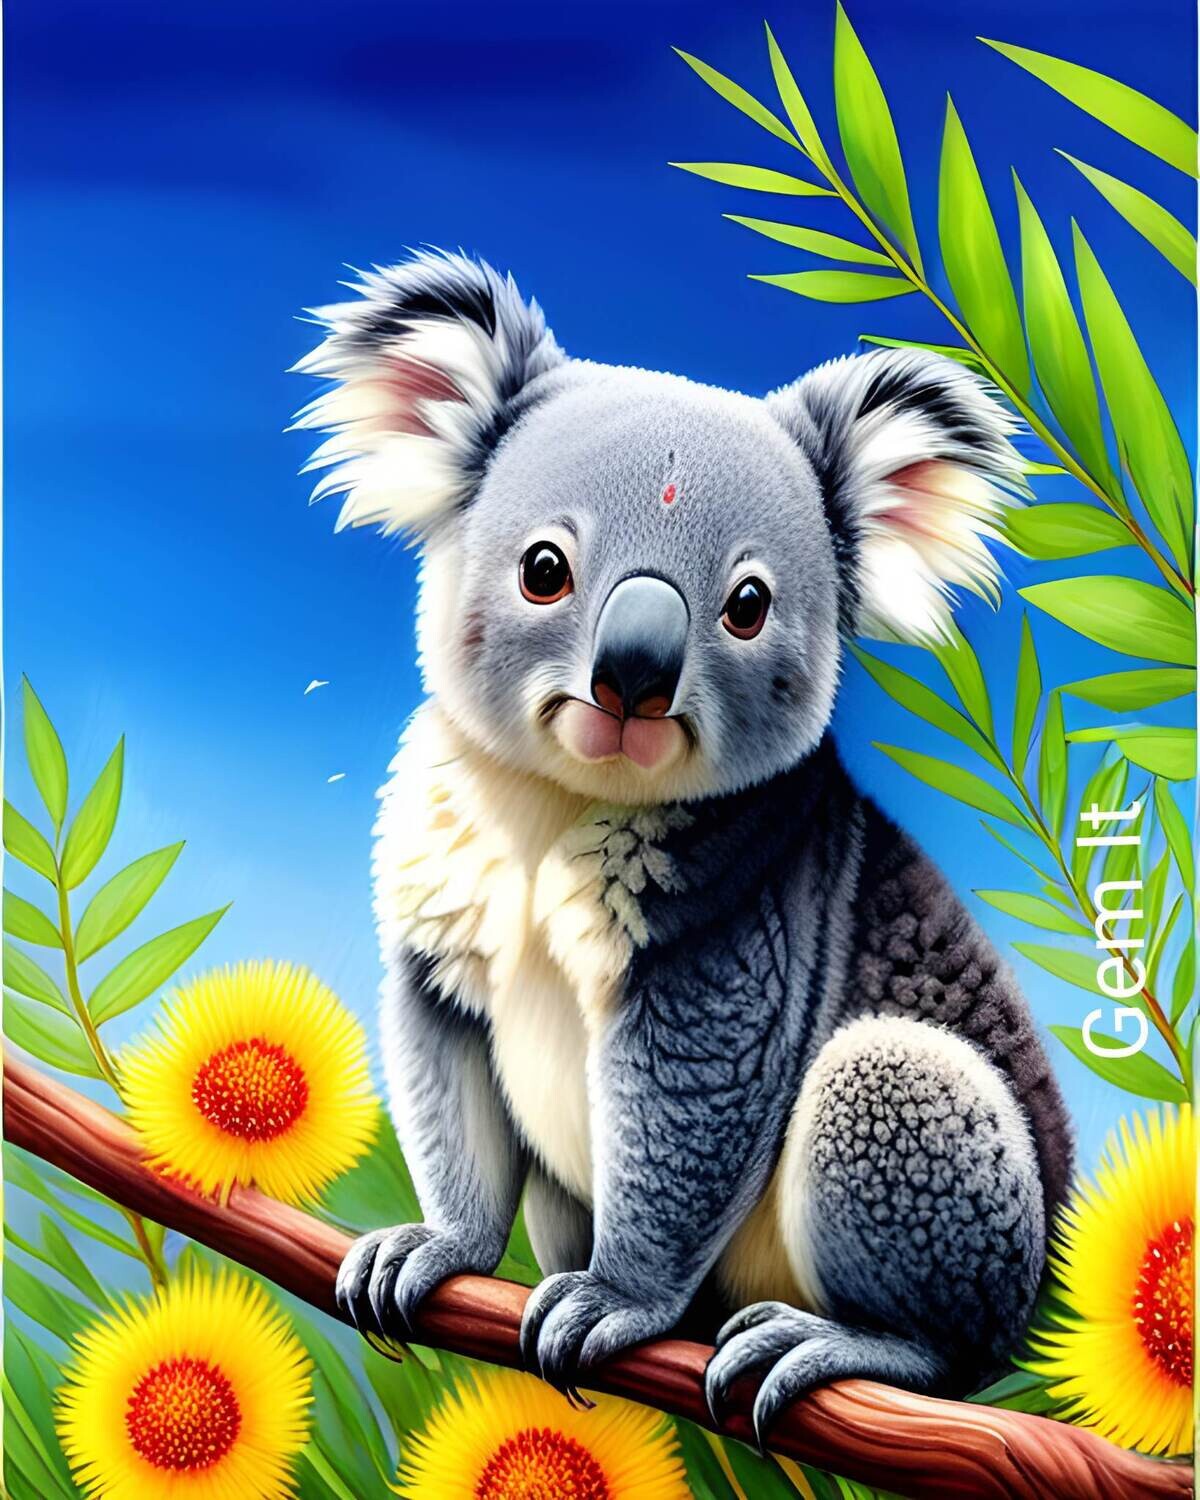 Cute Koala 3 - Specially ordered for you. Delivery is approximately 4 - 6 weeks.